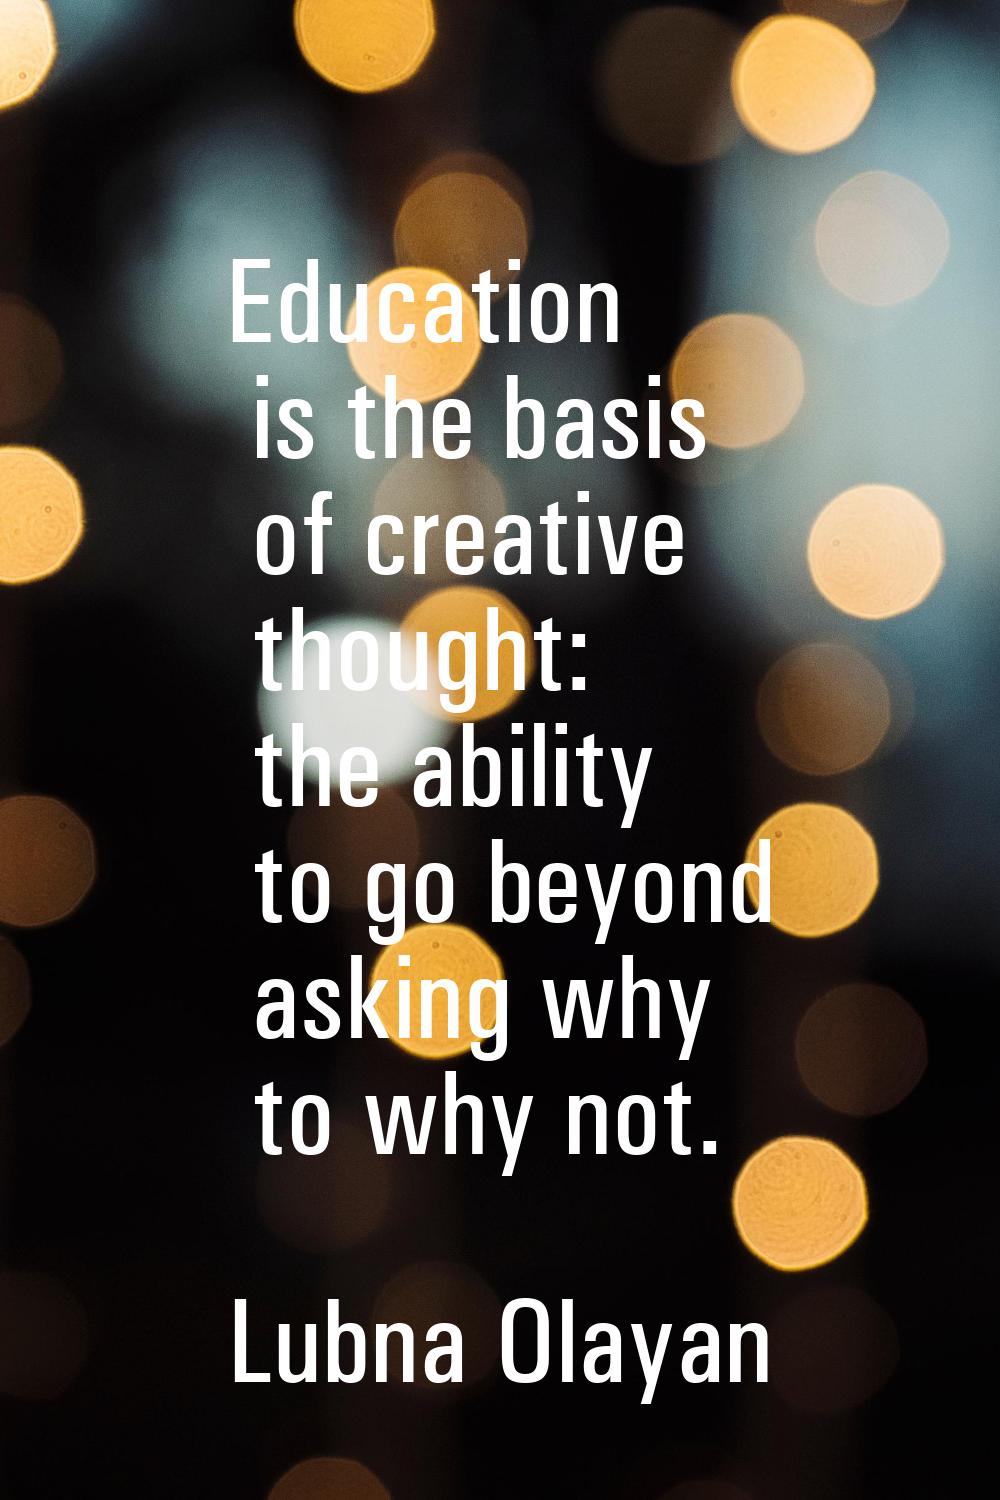 Education is the basis of creative thought: the ability to go beyond asking why to why not.